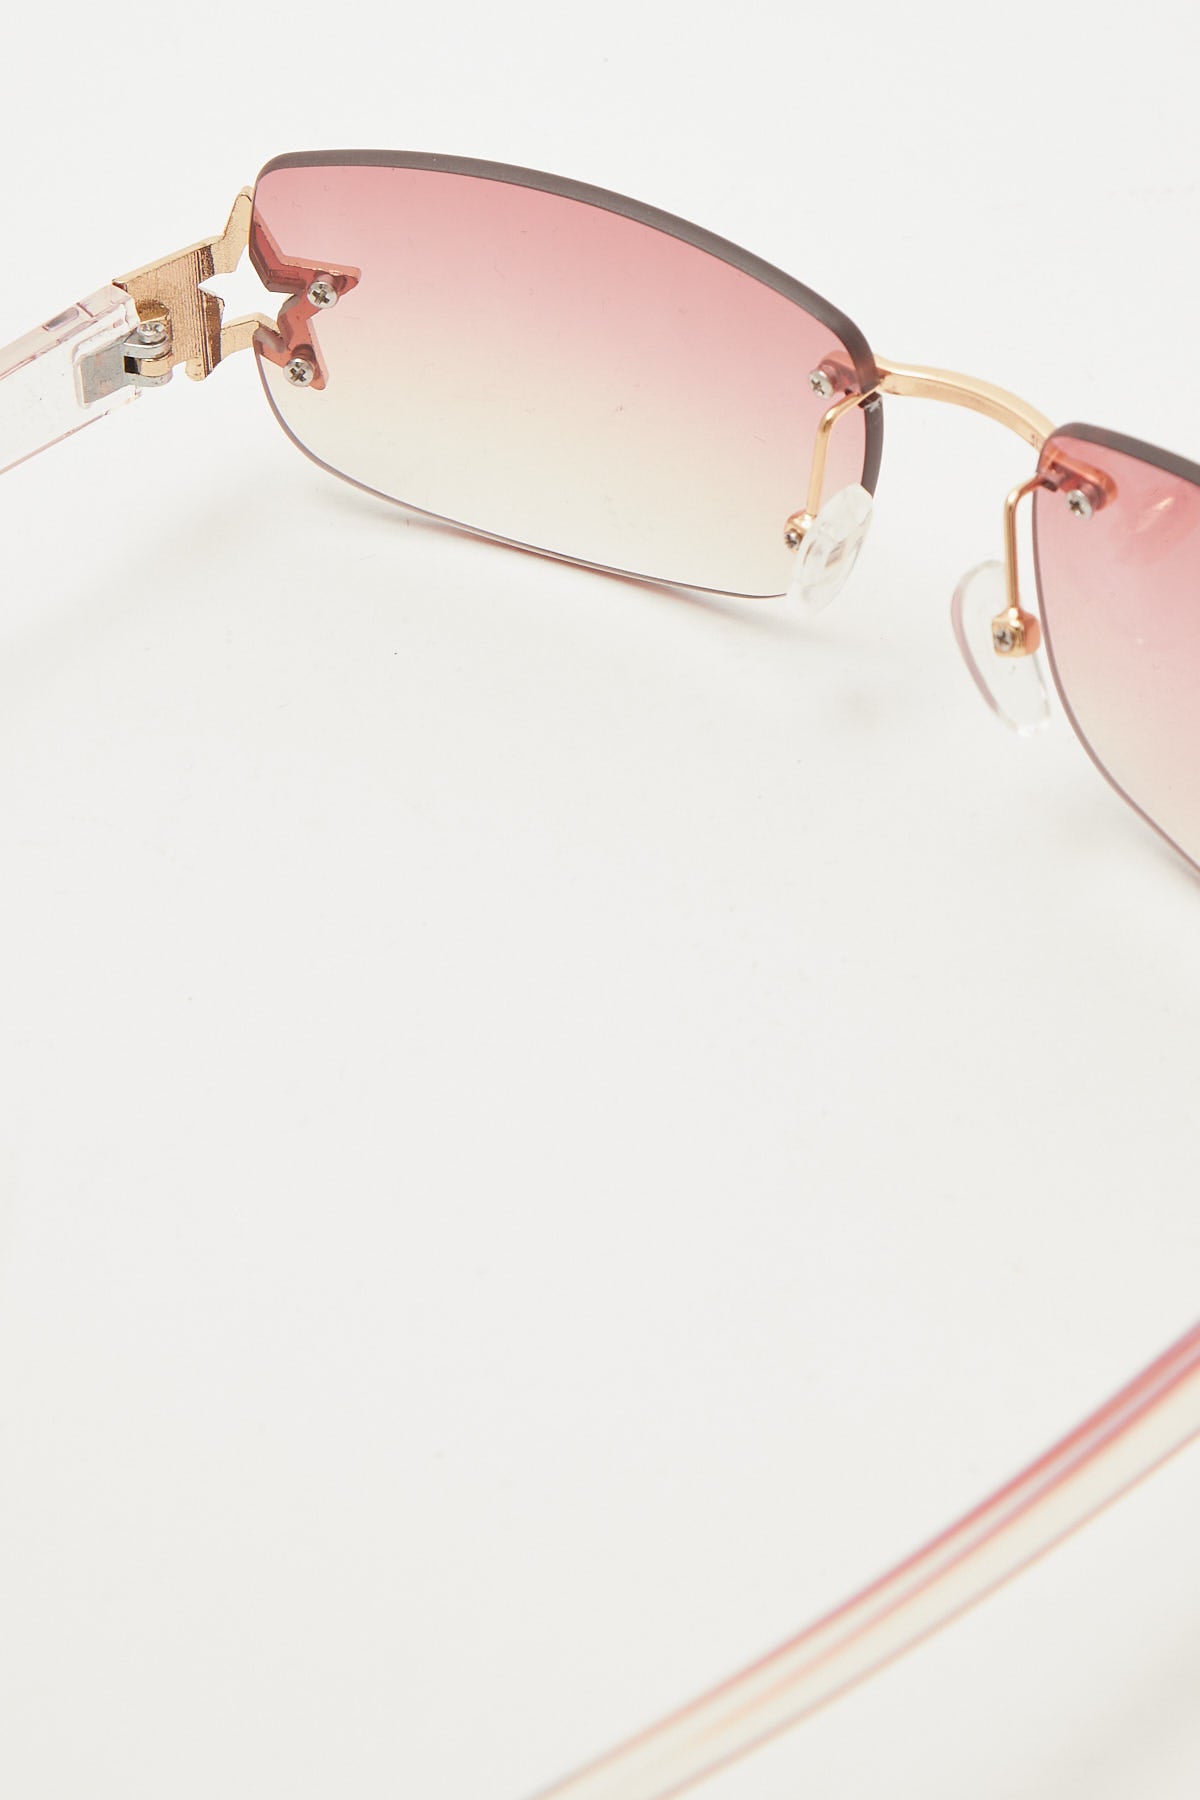 Angels Whisper Alexis Star Sunglasses Pink